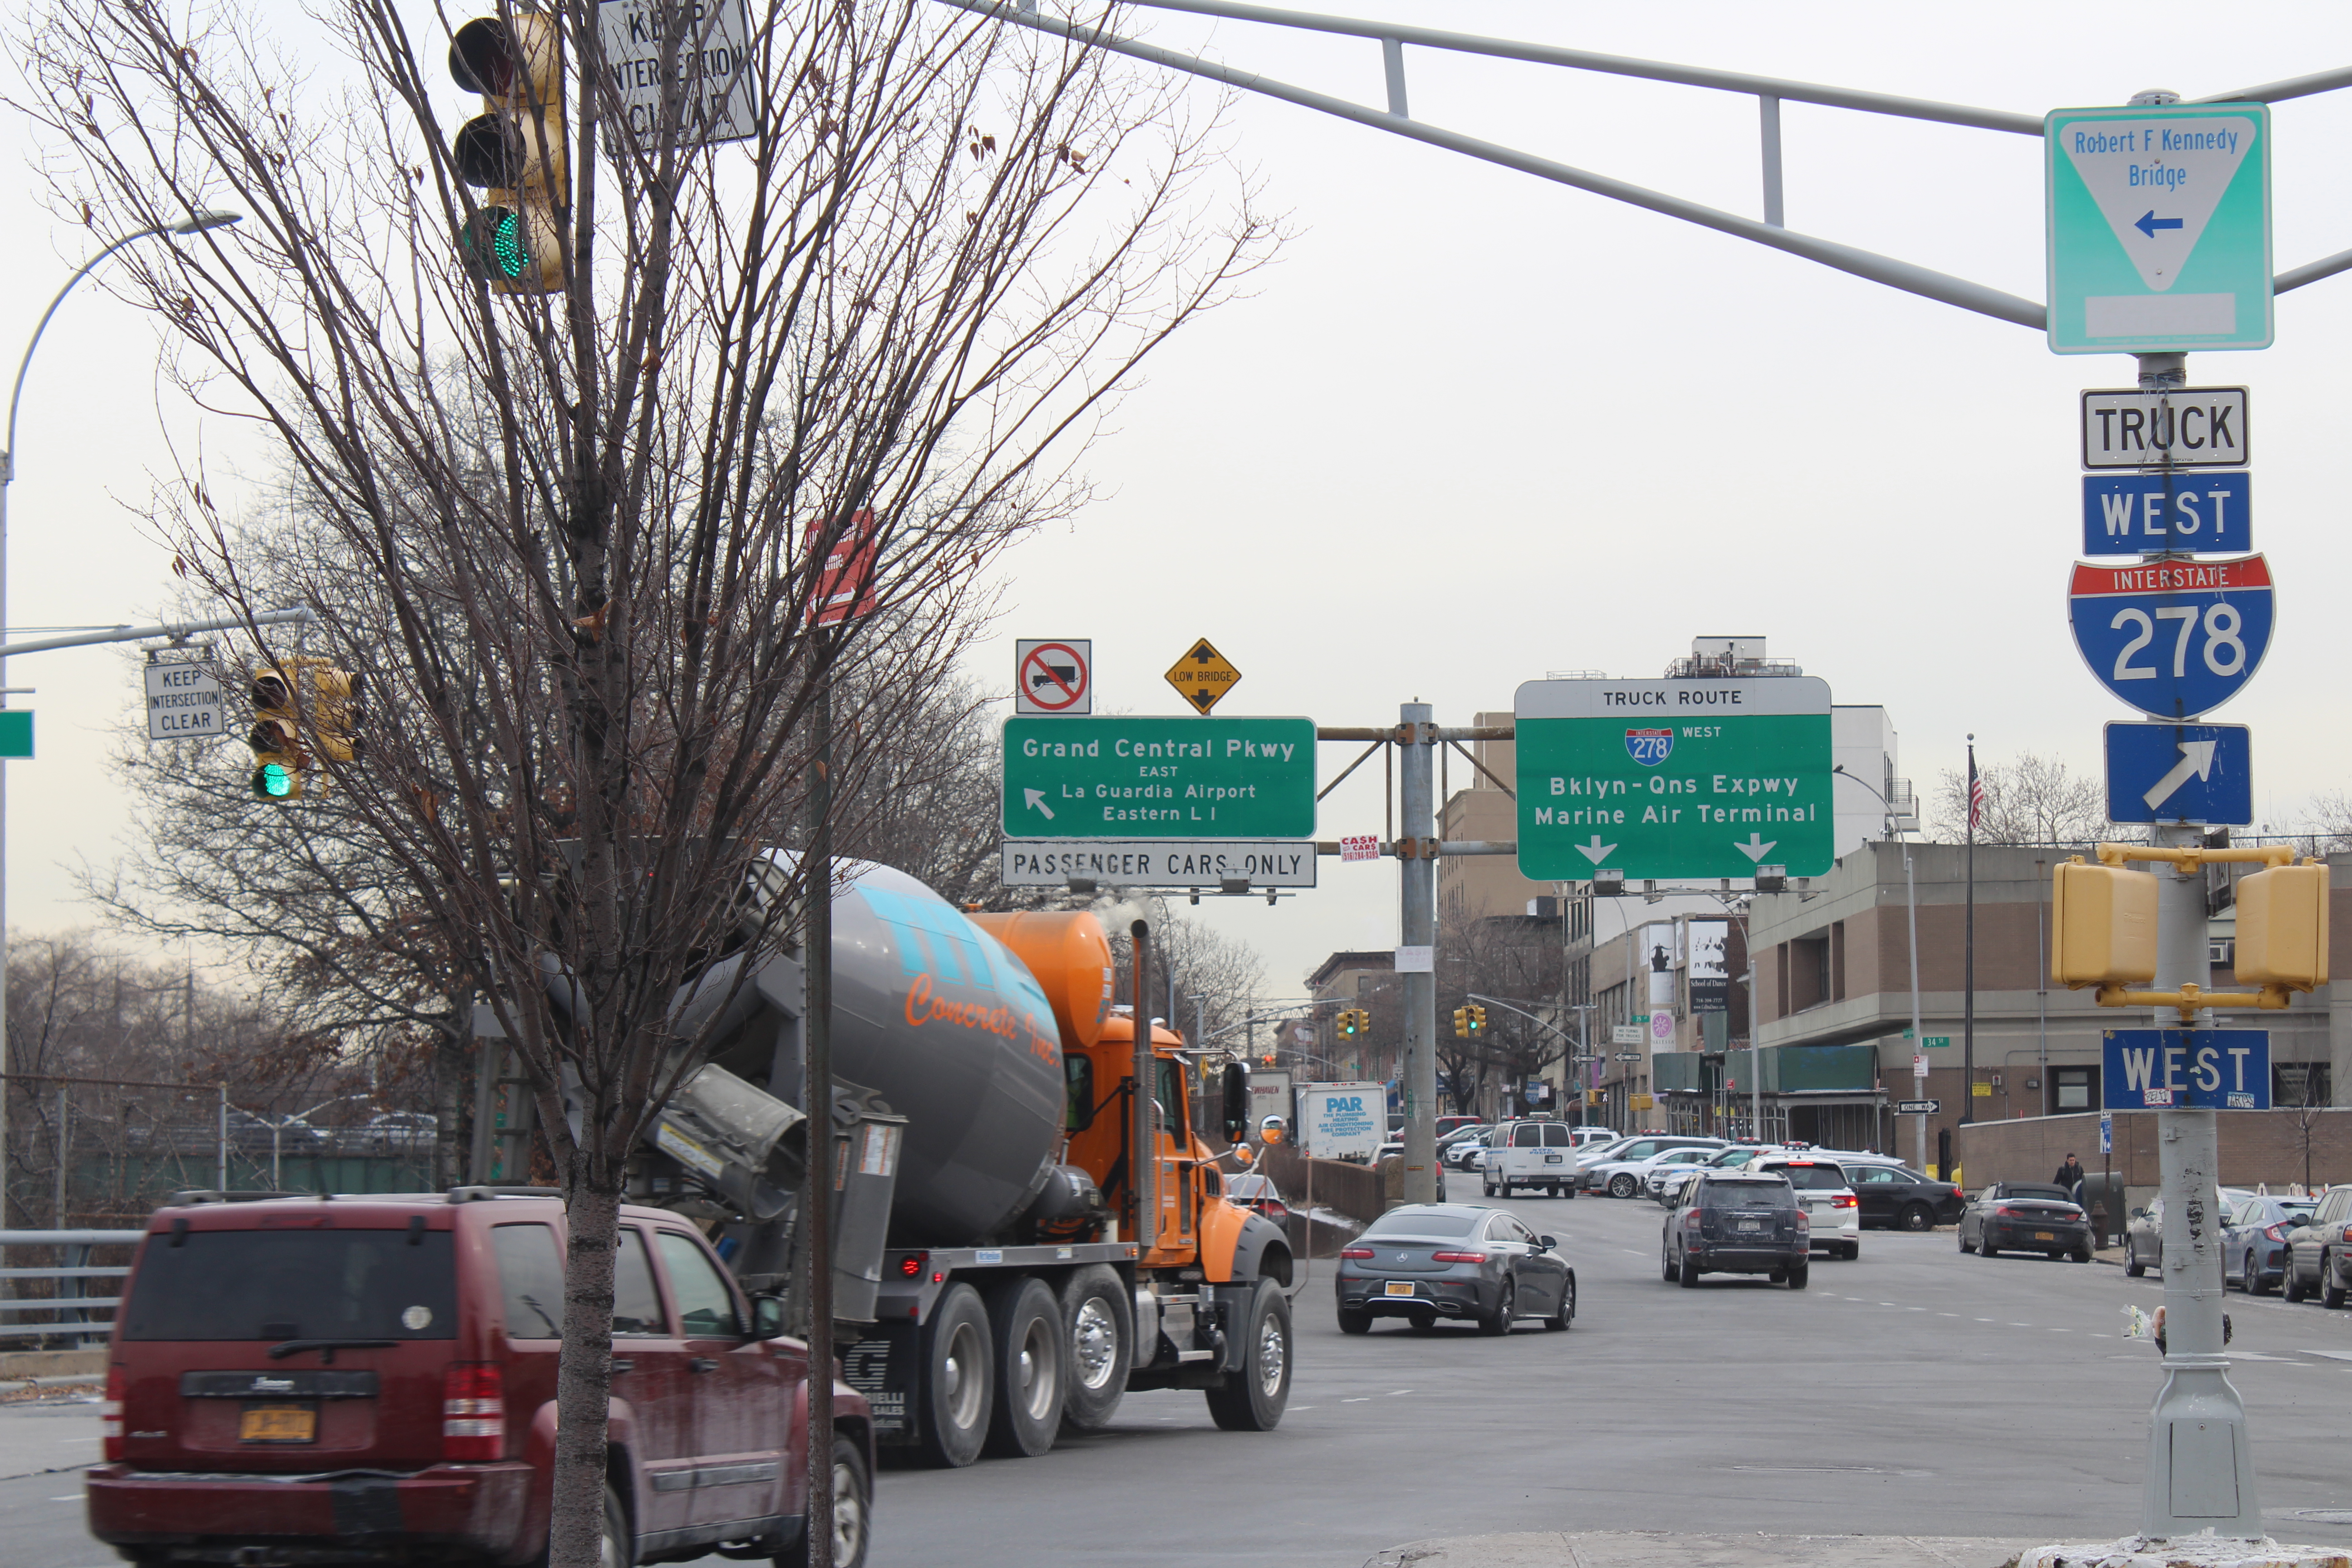 Trucks will be permitted on Grand Central Parkway in Astoria